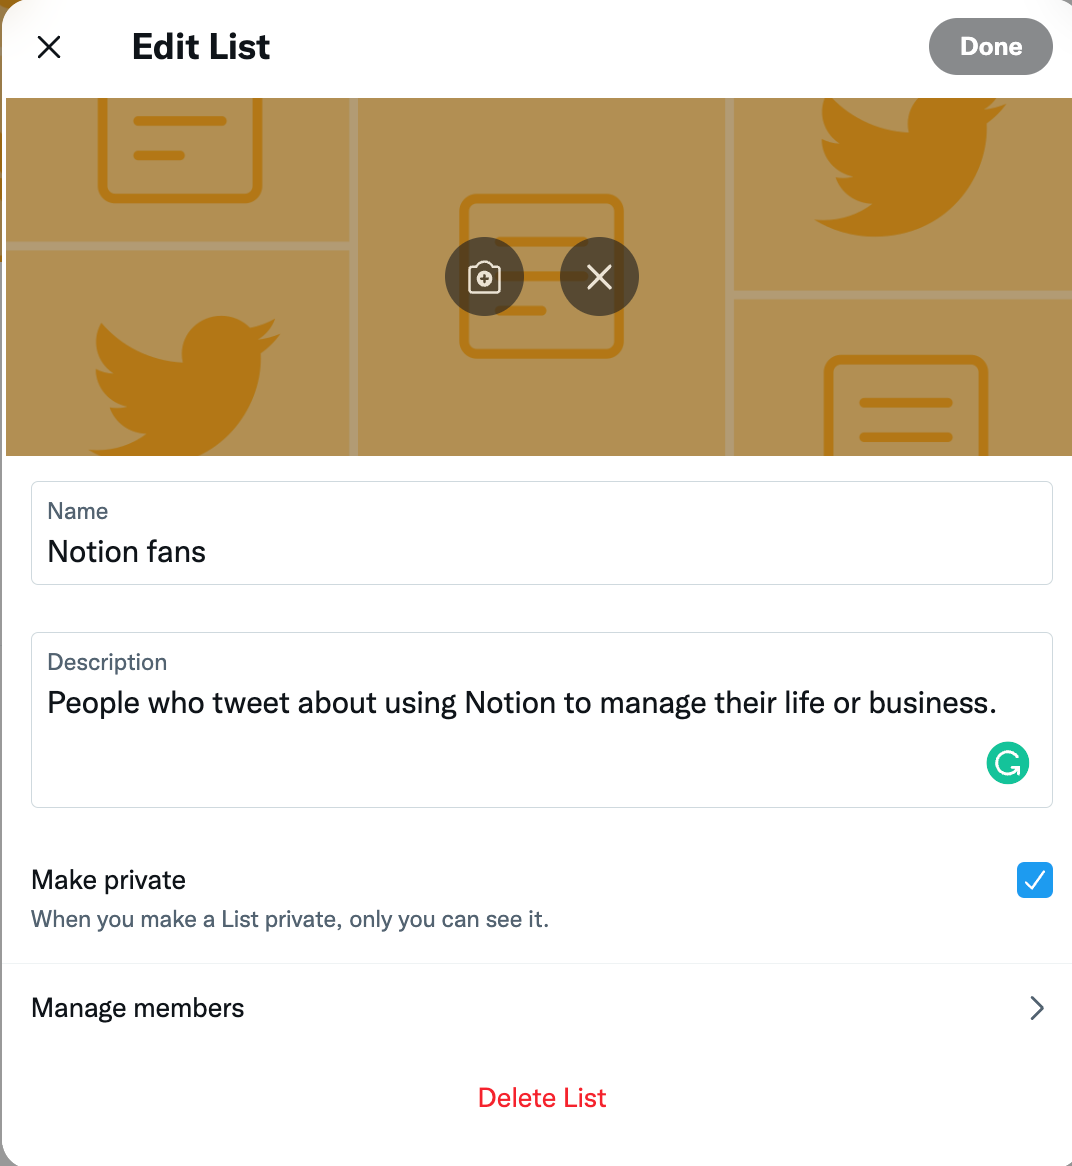 A screenshot of the Twitter list editor where I’m building a Notion fans list for people who tweet about using Notion to manage their life or business.